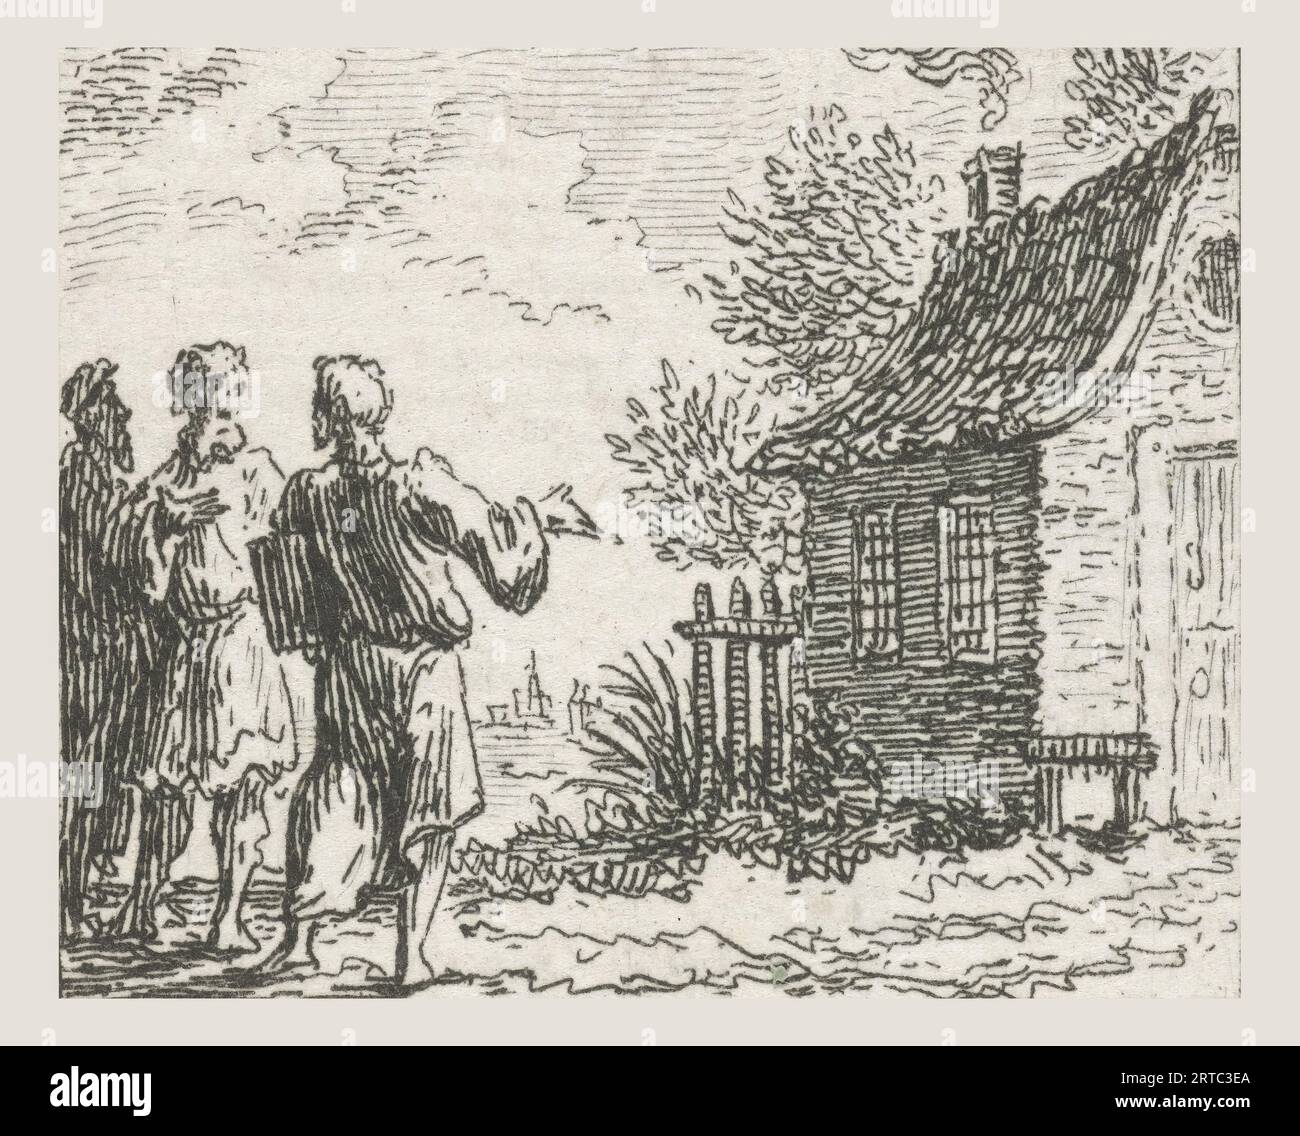 Fable of Socrates about friendship Illustrations for fable stories of Phaedrus (series title), Three men have a conversation in front of a house. This illustration was made in the Aesopian fables of the Latin poet Phaedrus, Fables. Simon Fokke (1712-1784) was a Dutch designer, etcher, and engraver. Born in Amsterdam, The Netherlands. Discover the enchanting world of Phaedrus' fables, where timeless wisdom meets captivating storytelling. In 'The Fables of Phaedrus,' you'll embark on a journey through the vivid landscapes of ancient Rome, where clever animals and cunning characters engage Stock Photo